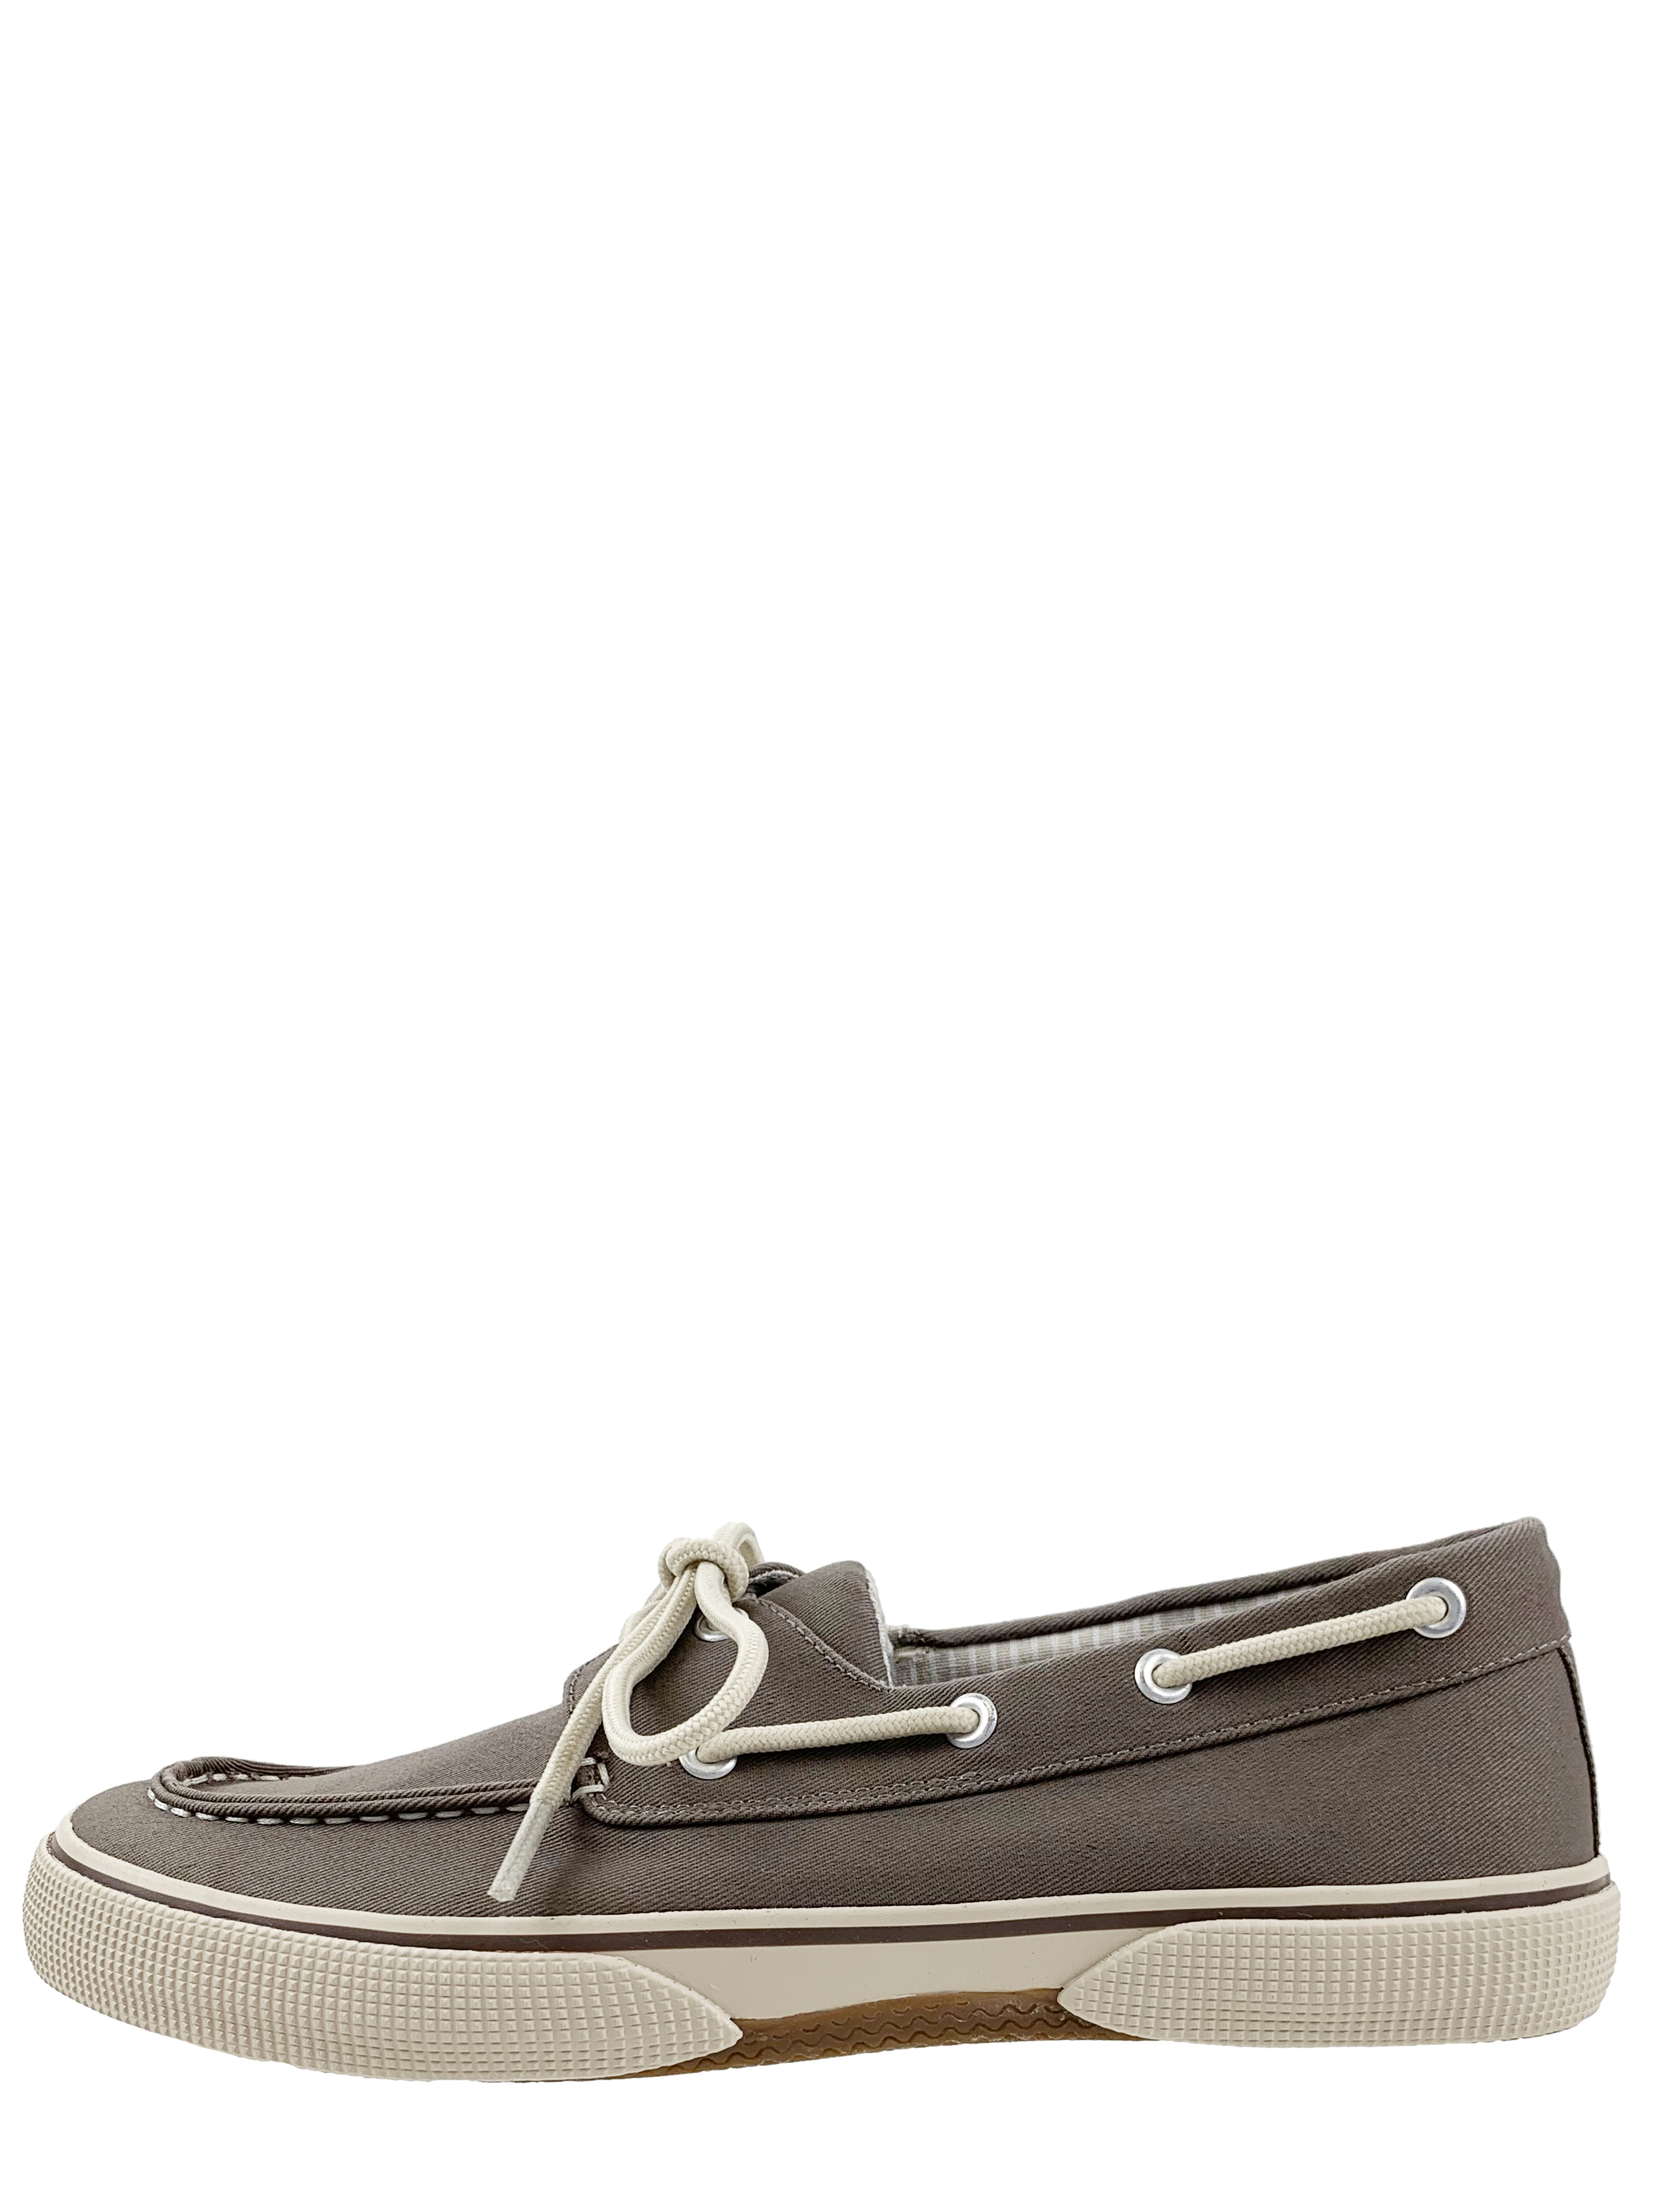 George Men's Classic Canvas Boat Shoe with Memory Foam - image 2 of 5